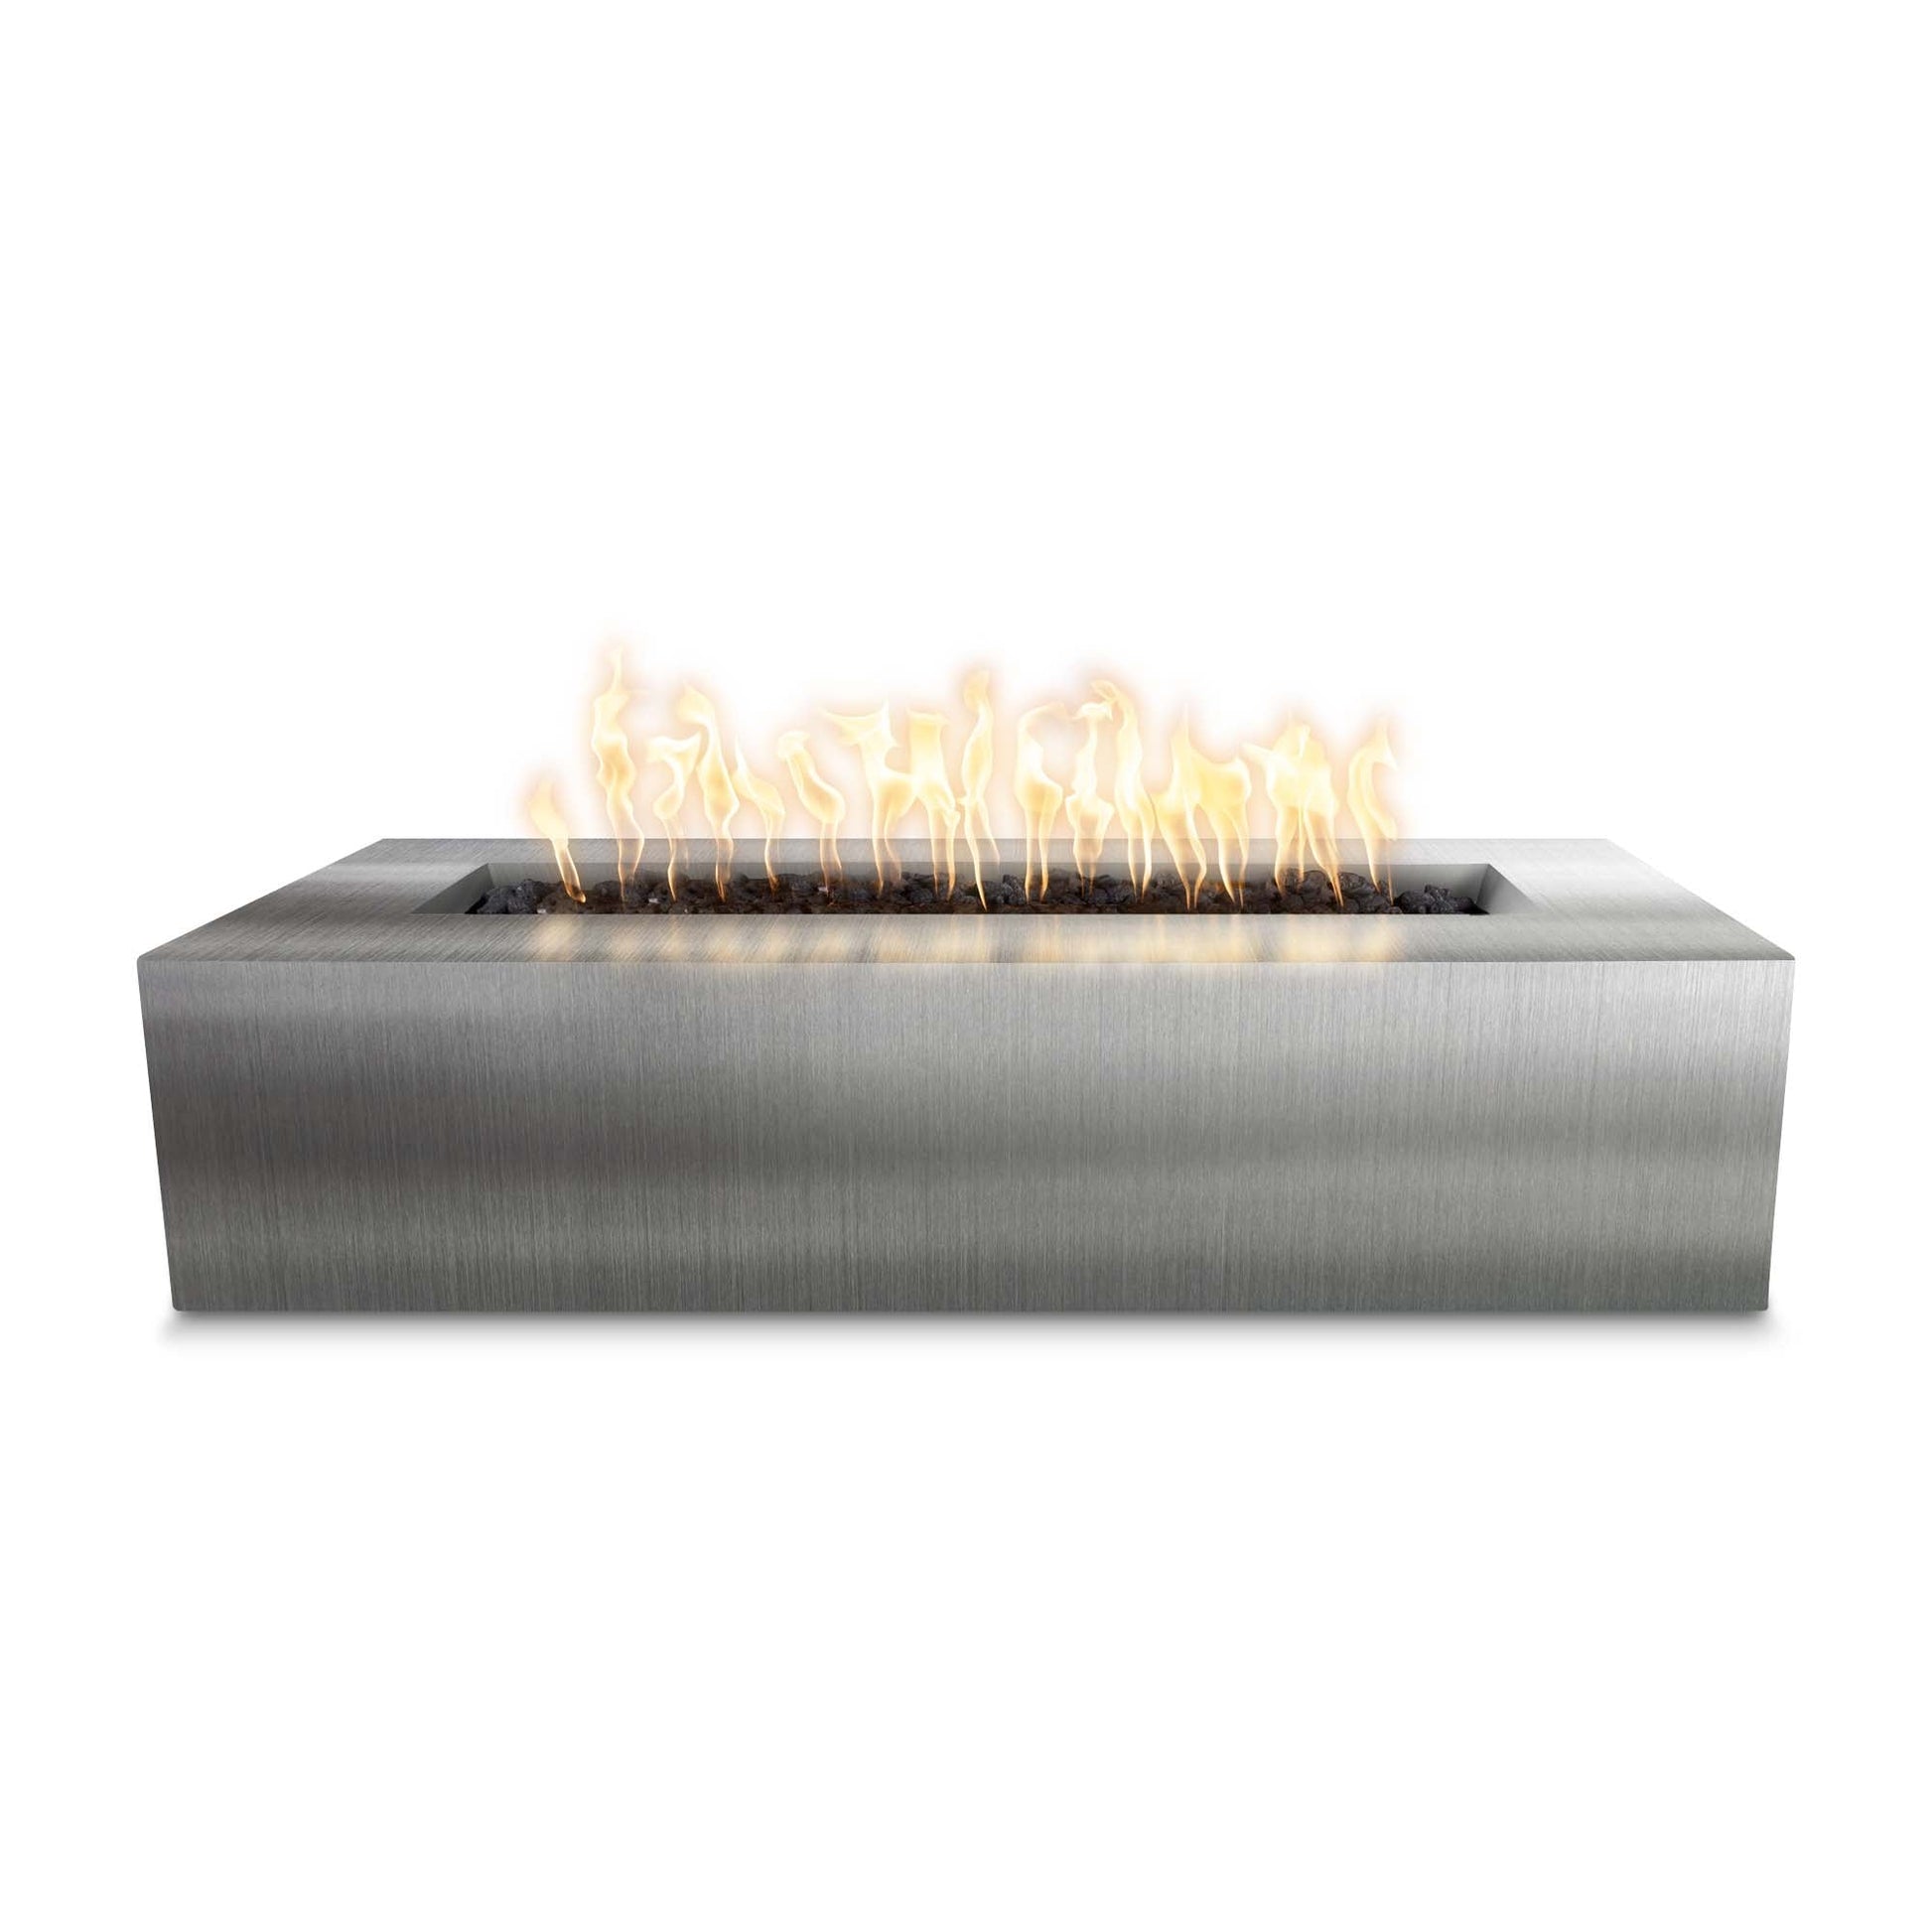 The Outdoor Plus Rectangular Regal 48" Hammered Copper Natural Gas Fire Pit with Match Lit Ignition